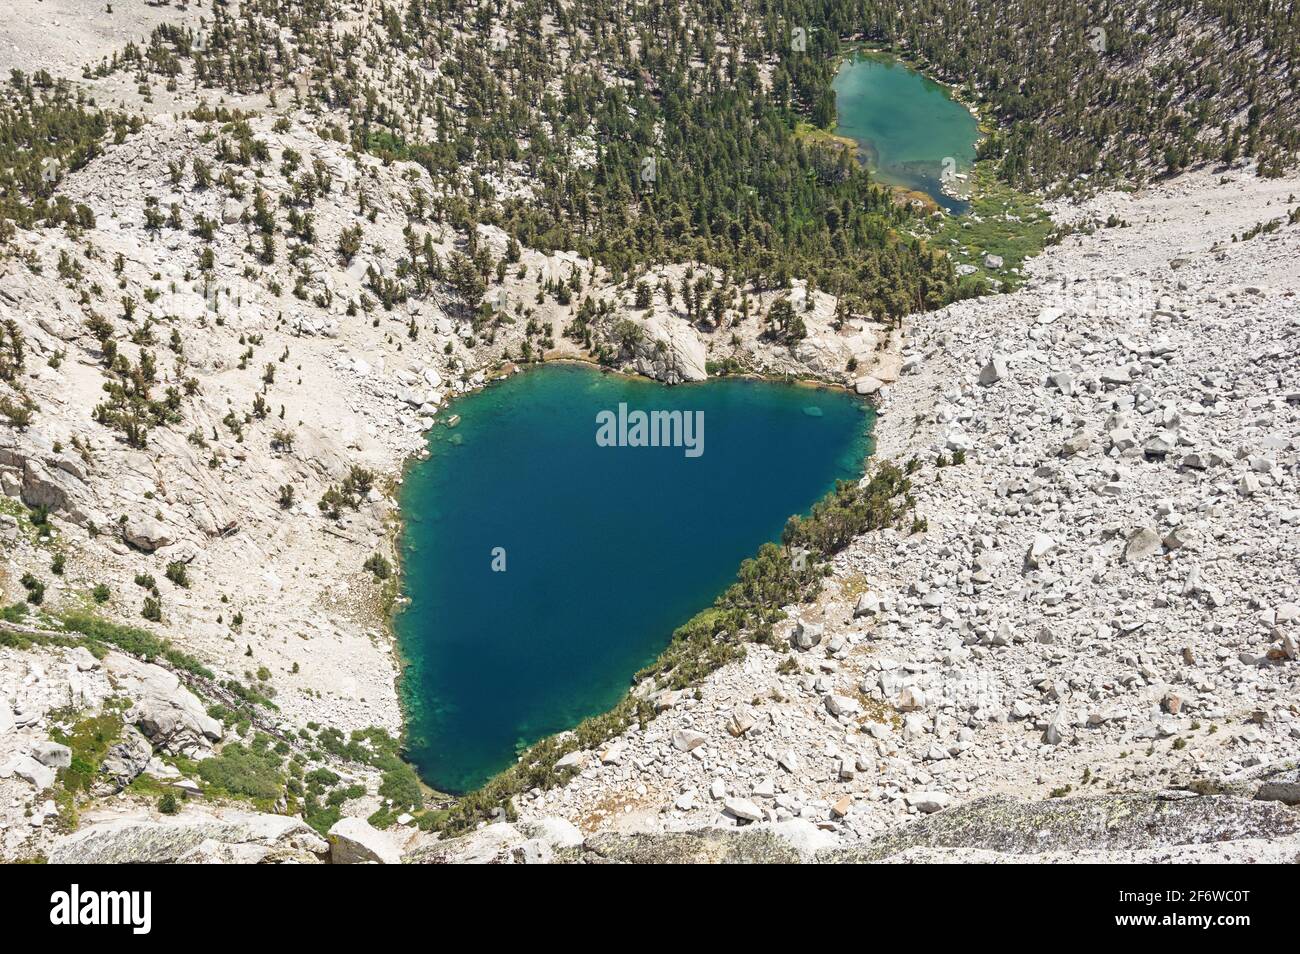 Heart Lake in the Onion Valley region of the Eastern Sierra Nevada Mountains in California viewed from above Stock Photo